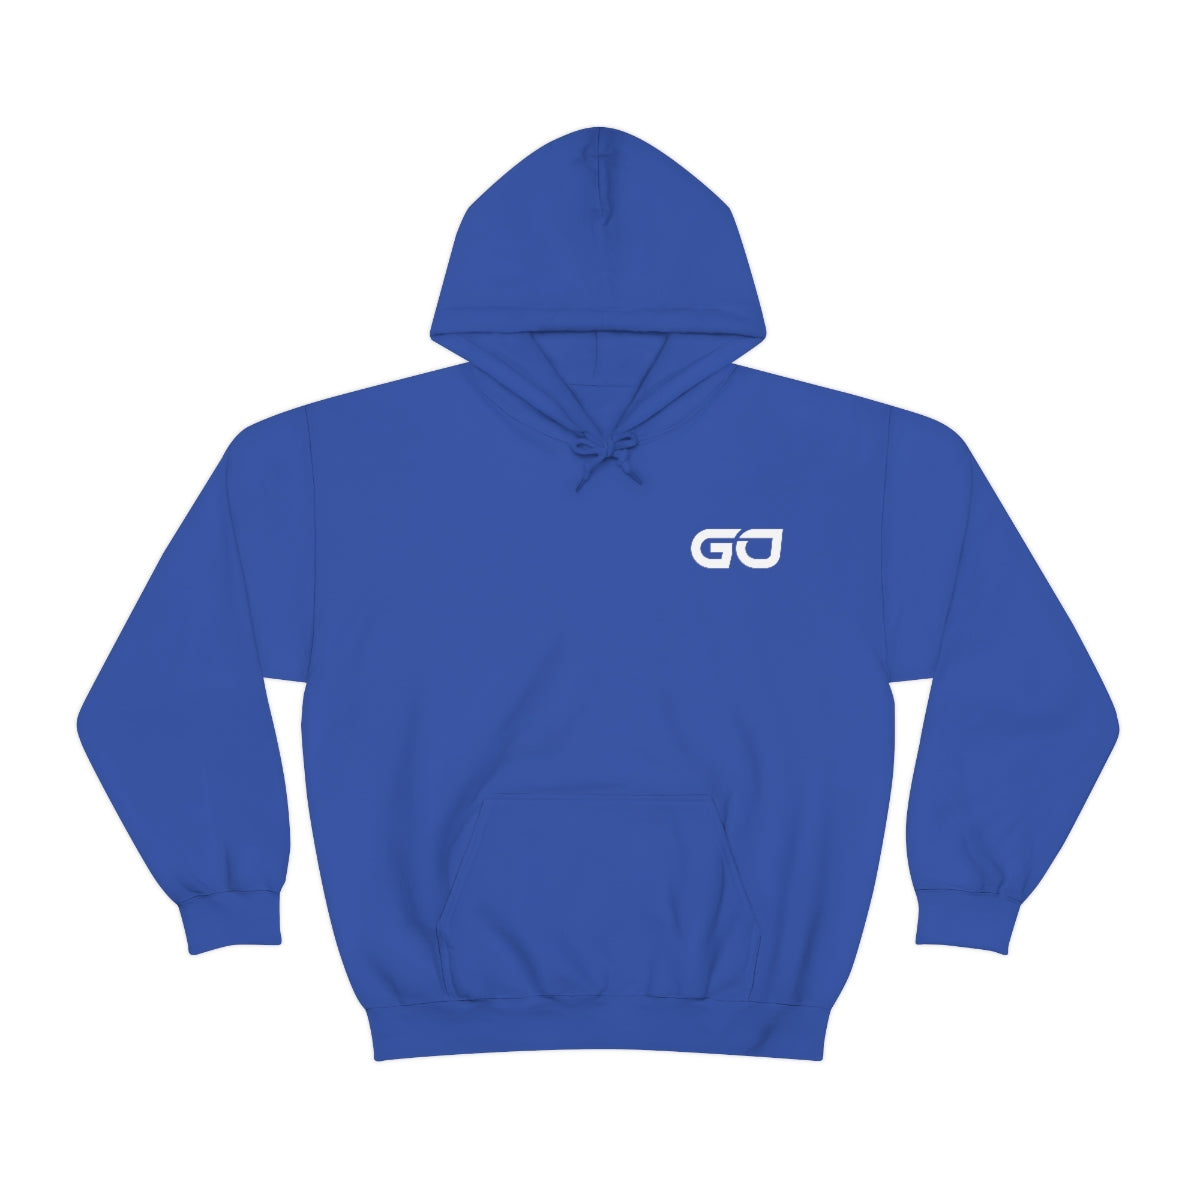 Gabriel Onorato "GO" Hoodie